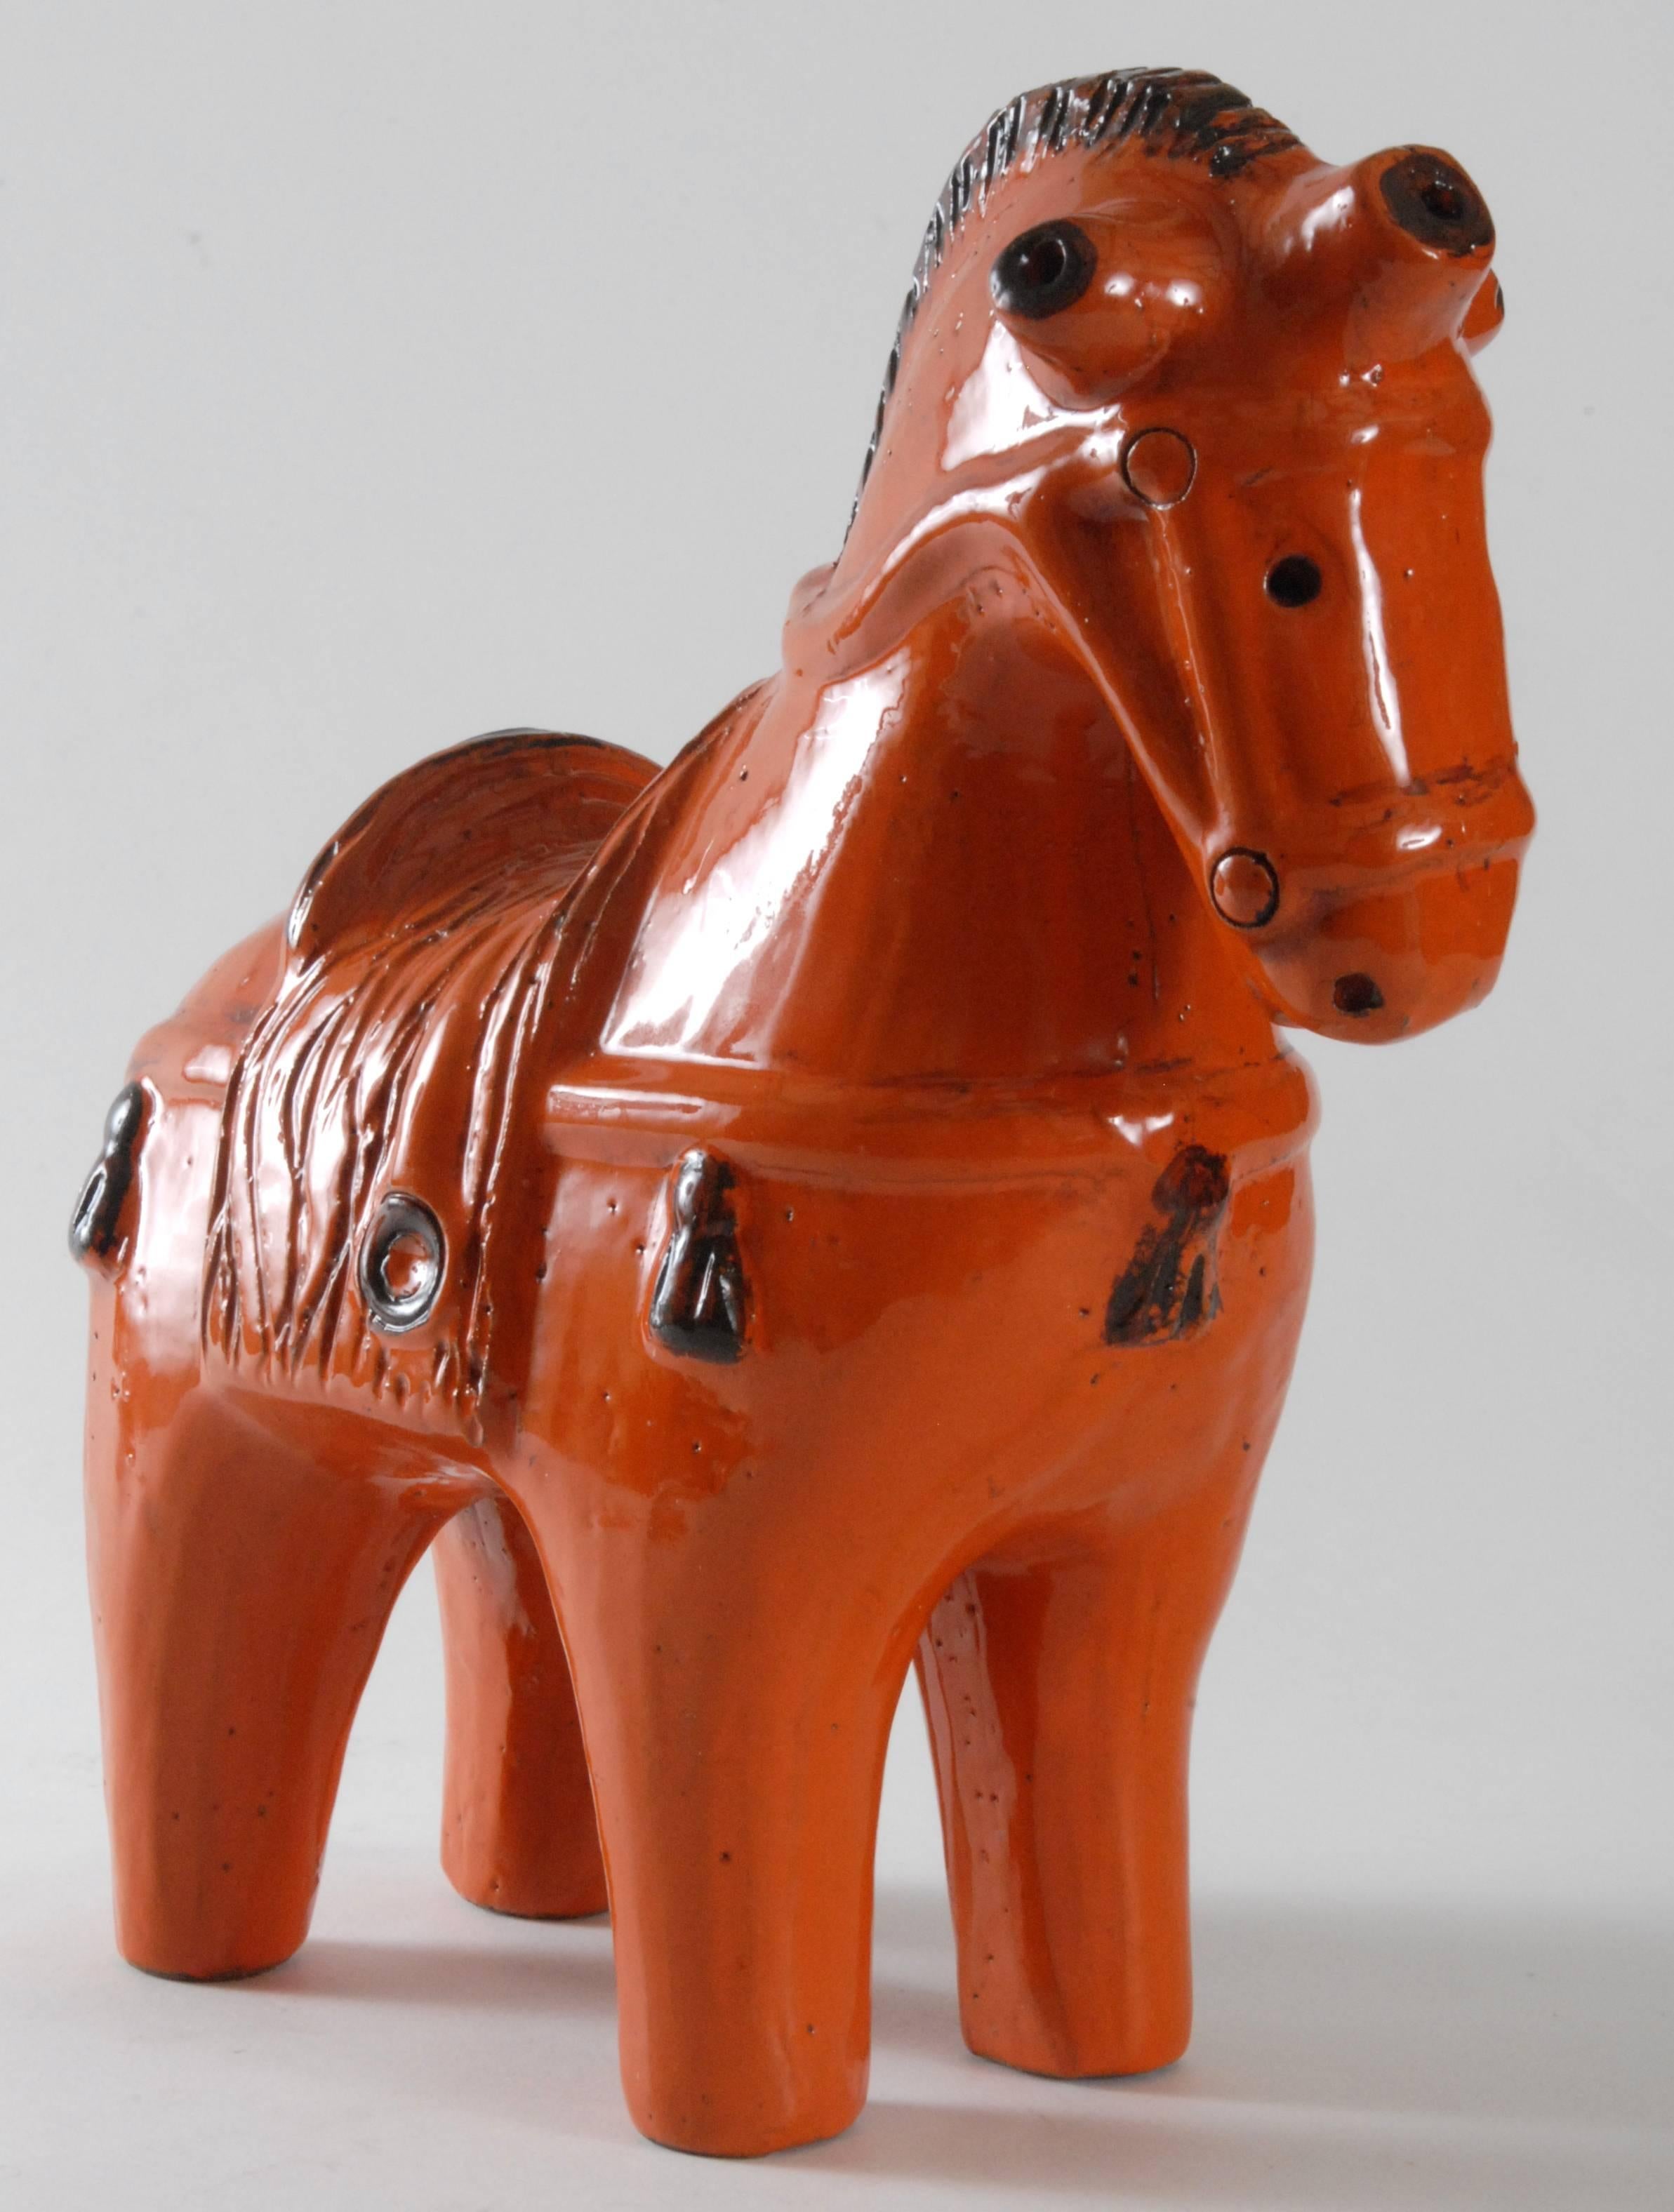 A large Aldo Londi designed brilliant orange horse. Highly stylized, the form resembles ancient clay horses made in ancient Greece, Rome or China. This is the large size at 31 cm high.